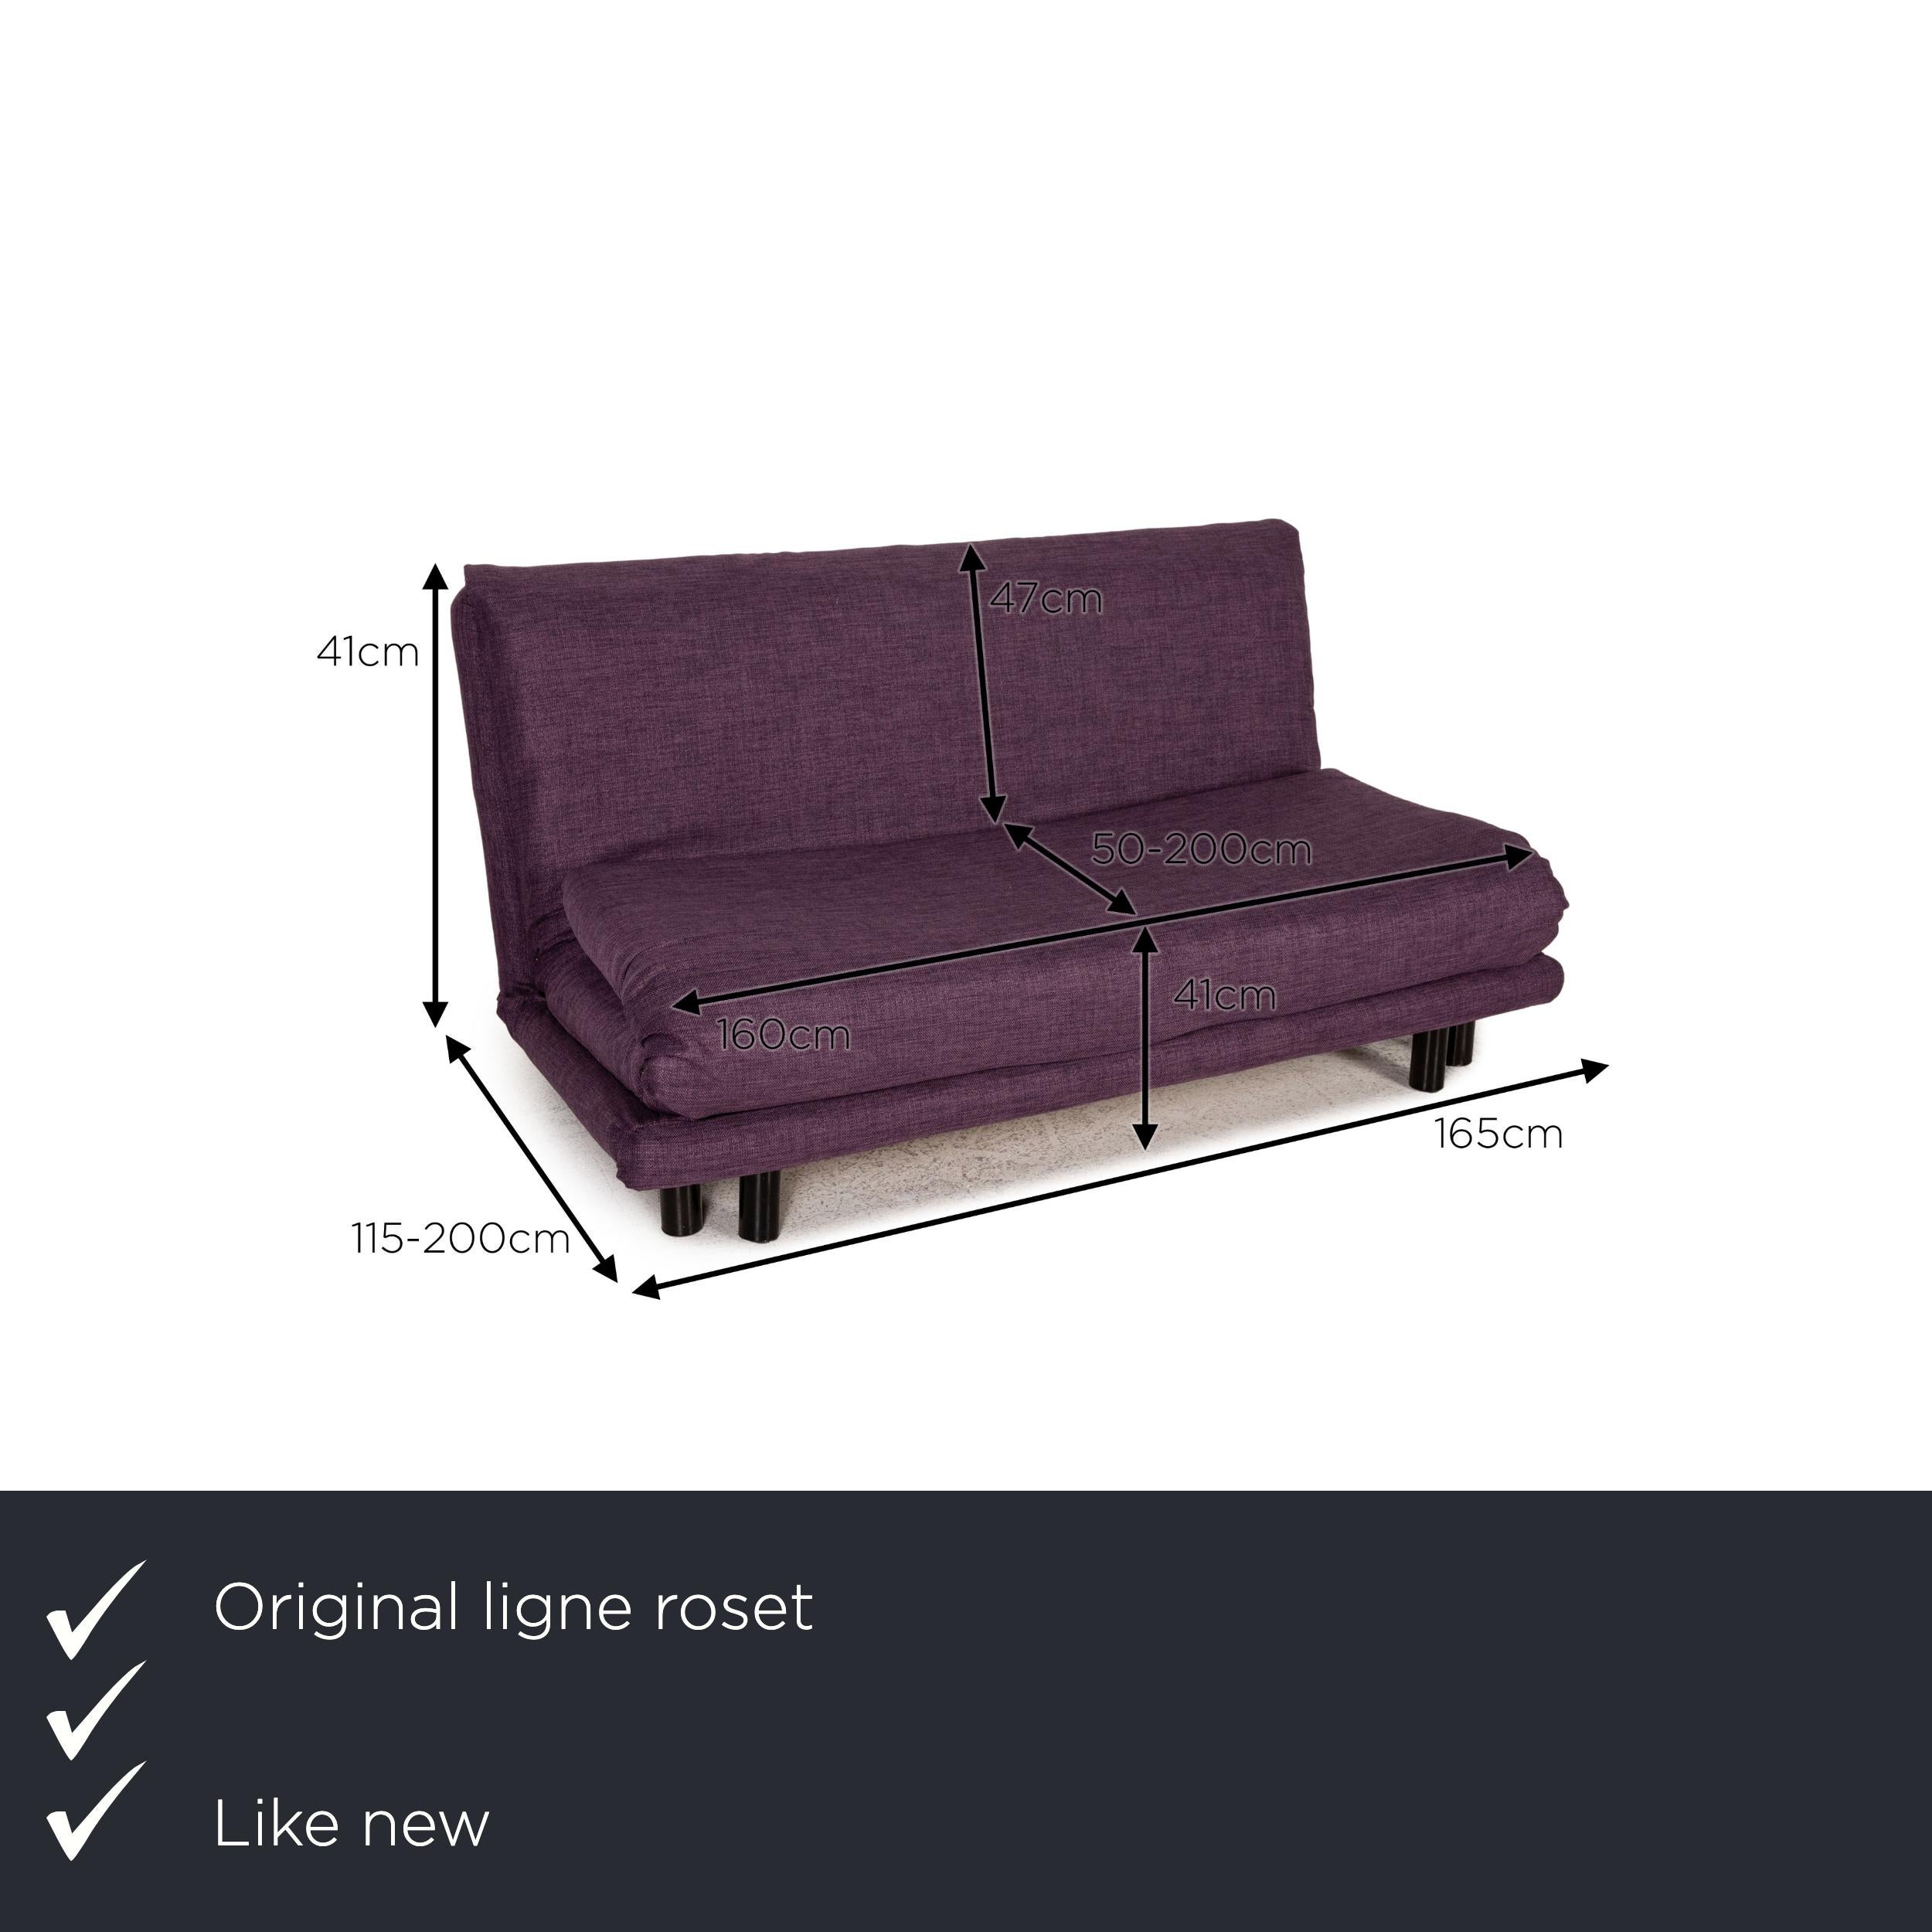 We present to you a ligne roset Multy fabric sofa purple three-seater couch function sleeping.

Product measurements in centimeters:

Measure: depth: 115
width: 165
height: 40
seat height: 41
rest height: 
seat depth: 50
seat width: